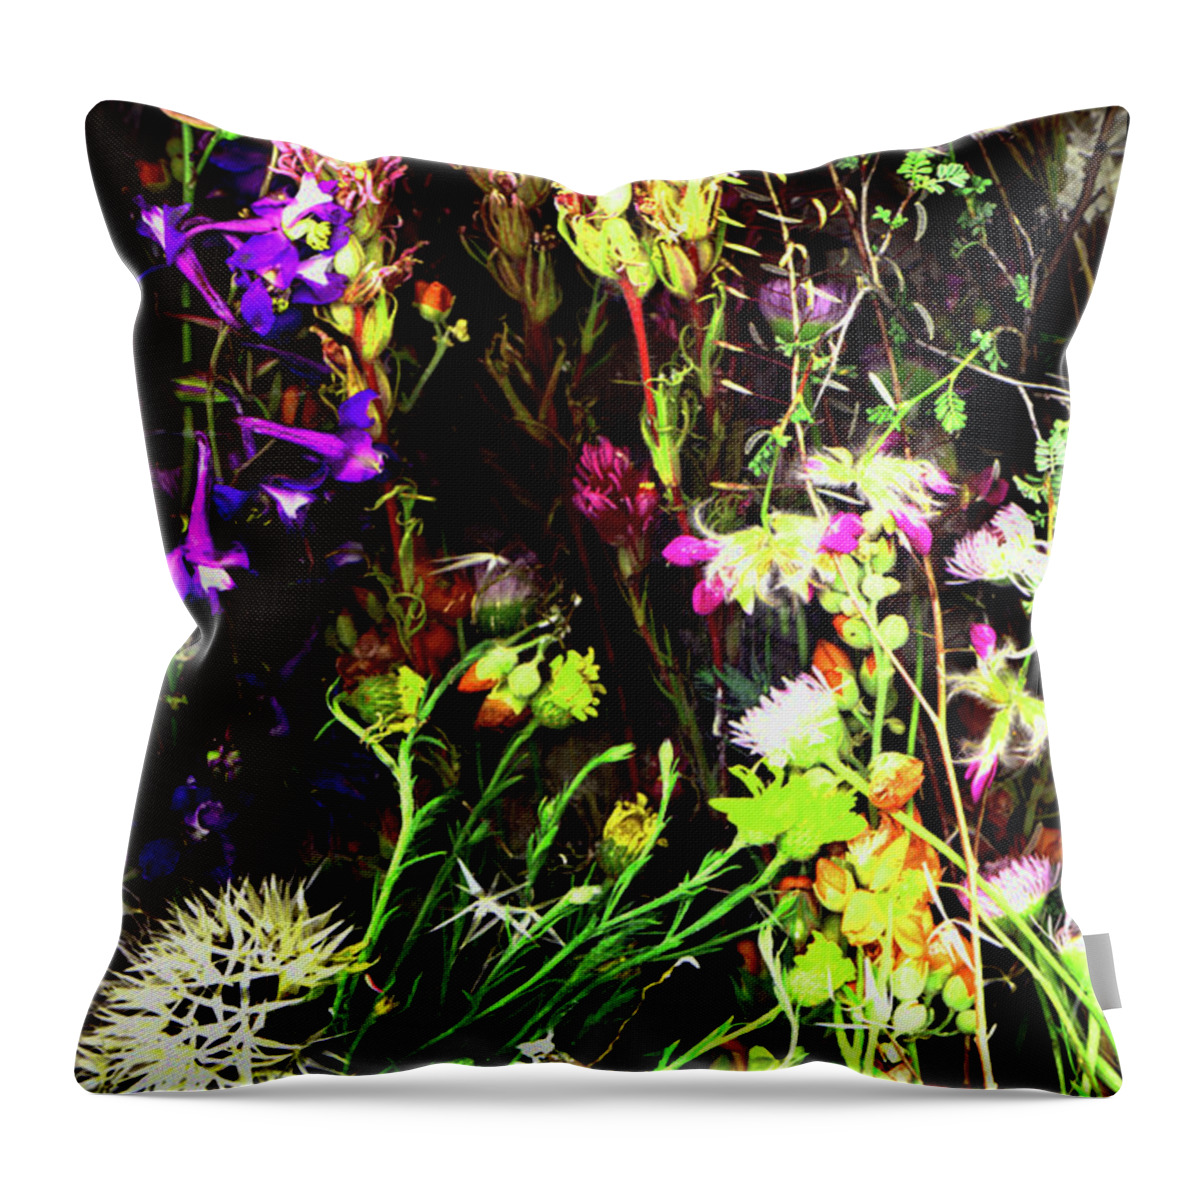 Sedona Throw Pillow featuring the photograph Sedons Wildflowers by Joe Hoover